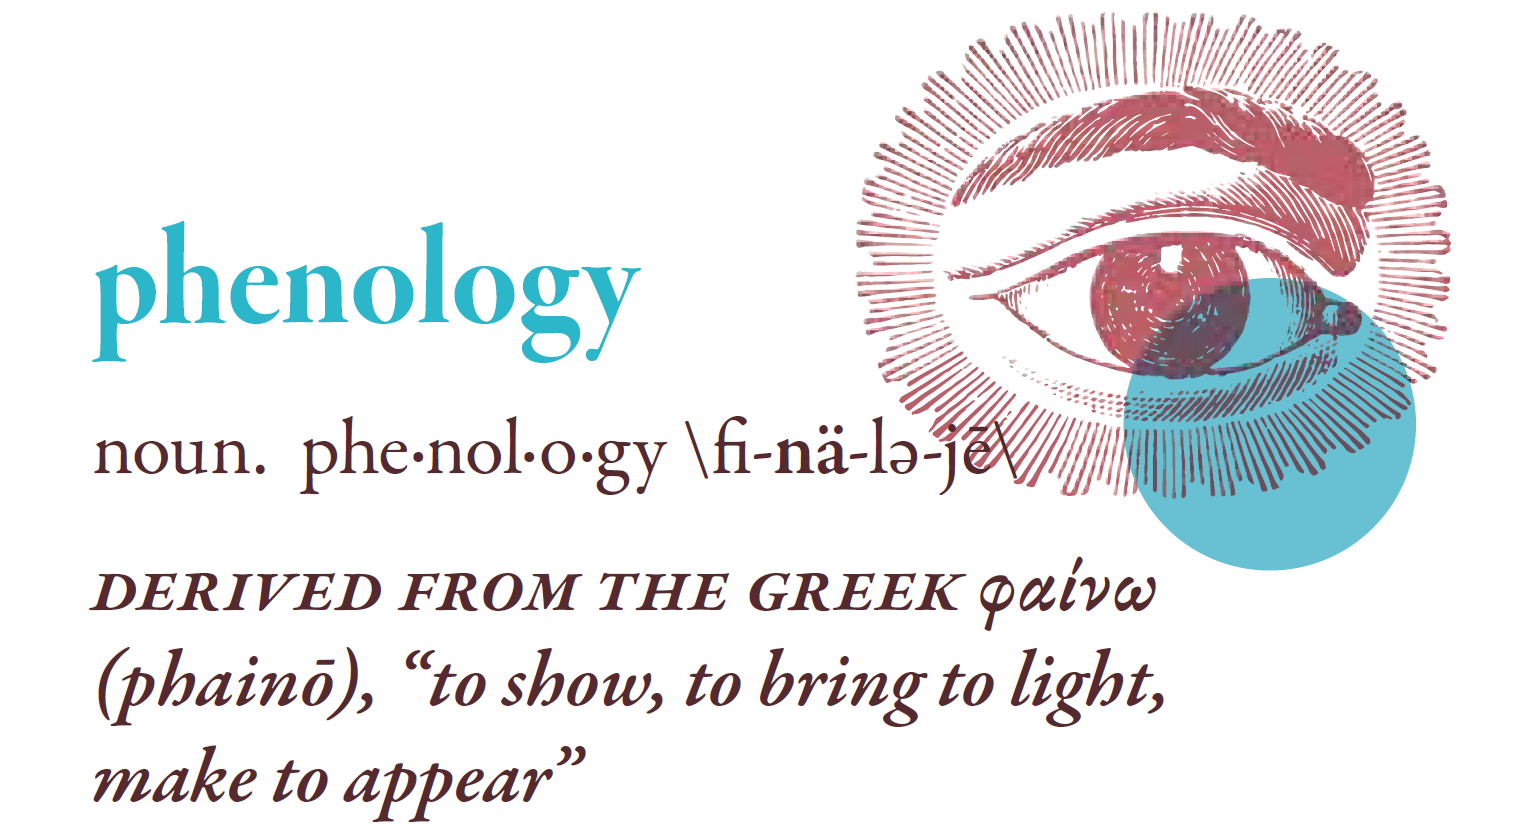 Dictionary entry for "phenology" with a line illustration of an open eye. Derived from the Greek "phaino," meaning "to show, to bring to light, to make appear"